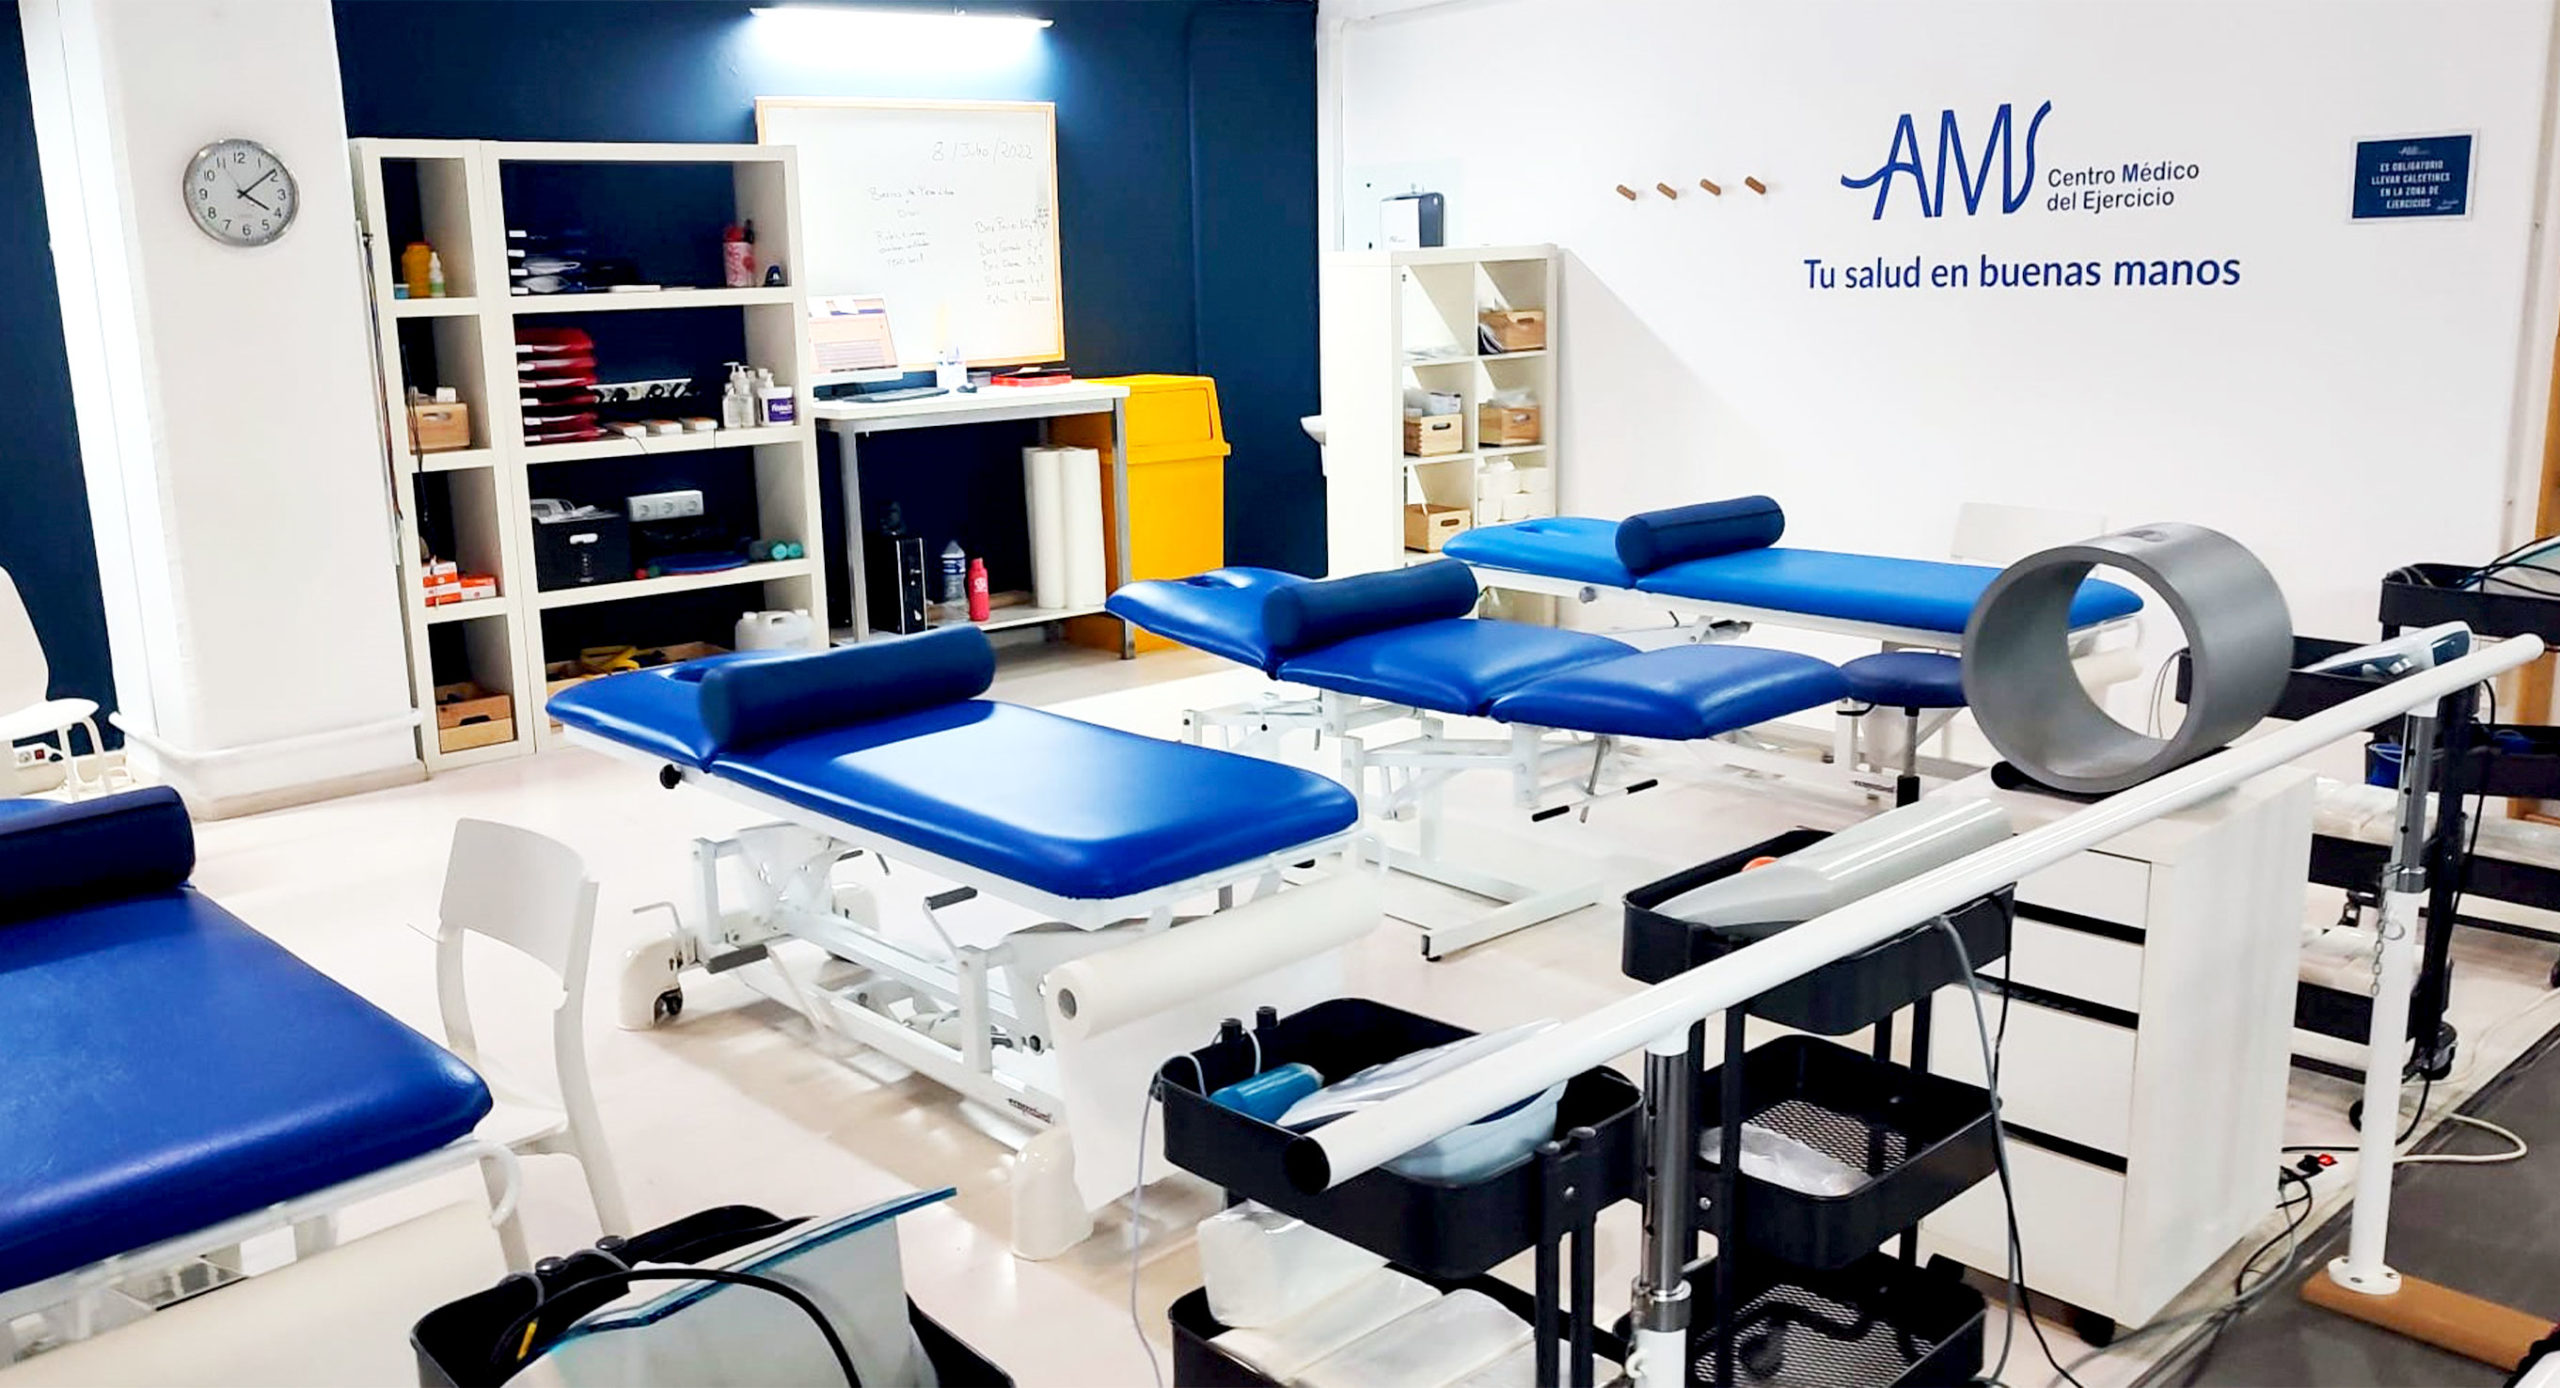 open room where the physiotherapy of insured patients in Malaga takes place